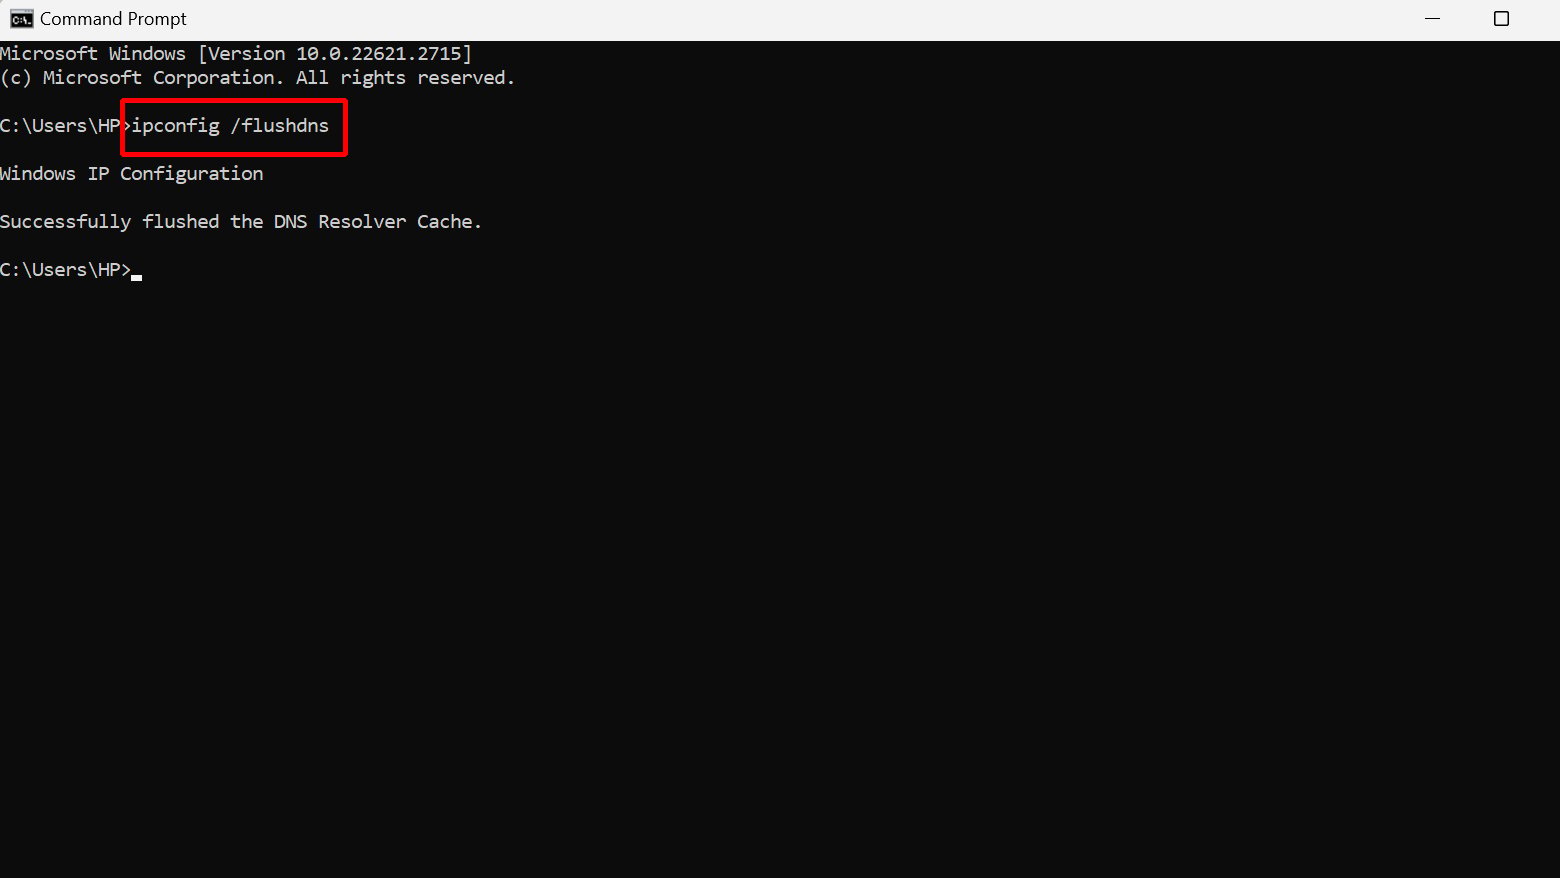 Command prompt showing successful DNS flush.